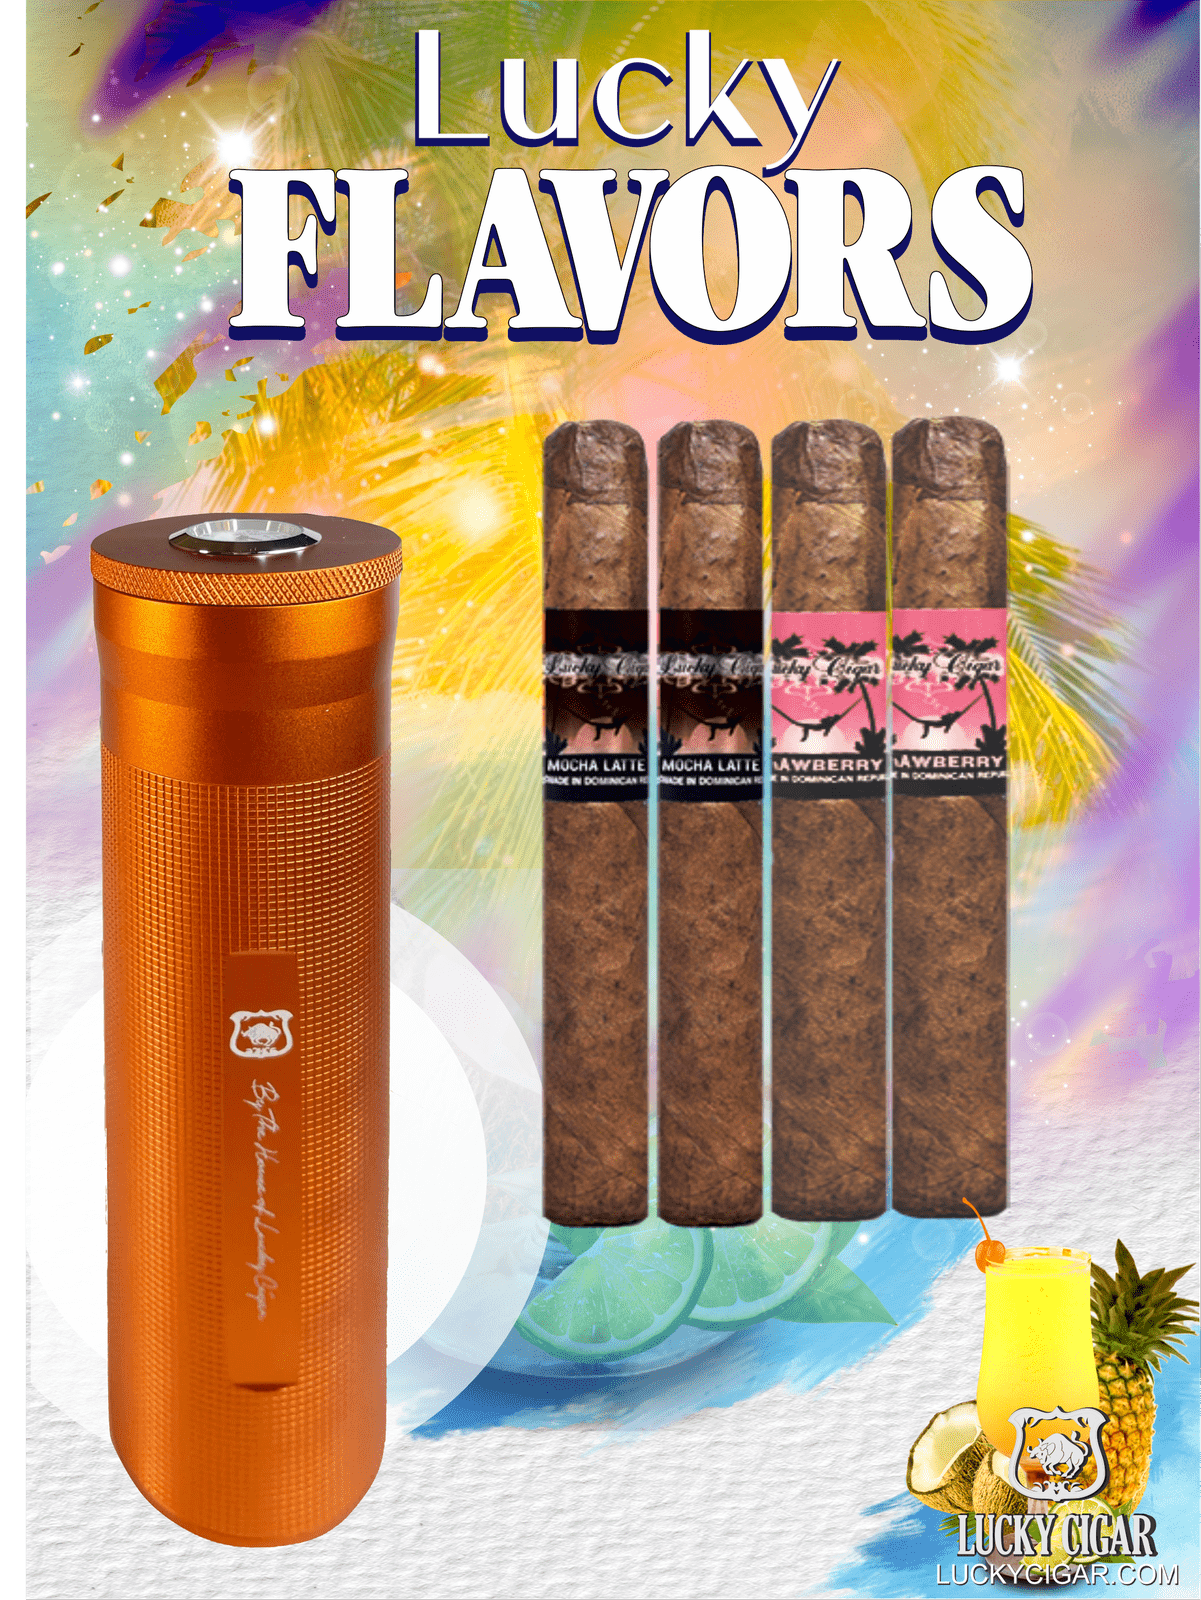 Flavored Cigars: Lucky Flavors 4 Cigar Set with Travel Humidor Strawberry, Mocha Latte